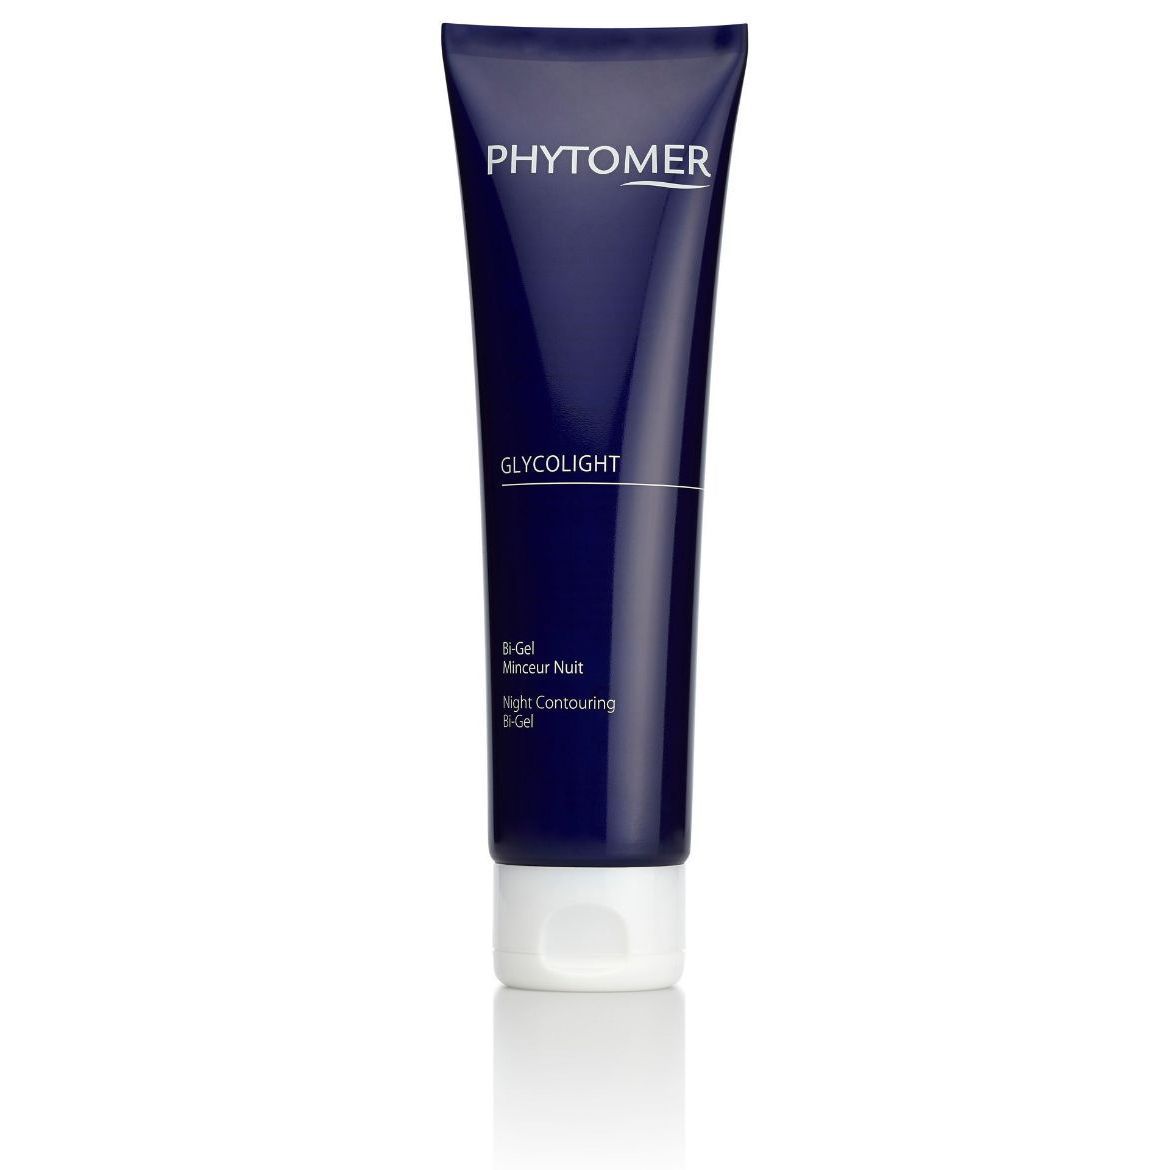 Immagine di Phytomer Glycolight - Minceur Nuit (150ml)